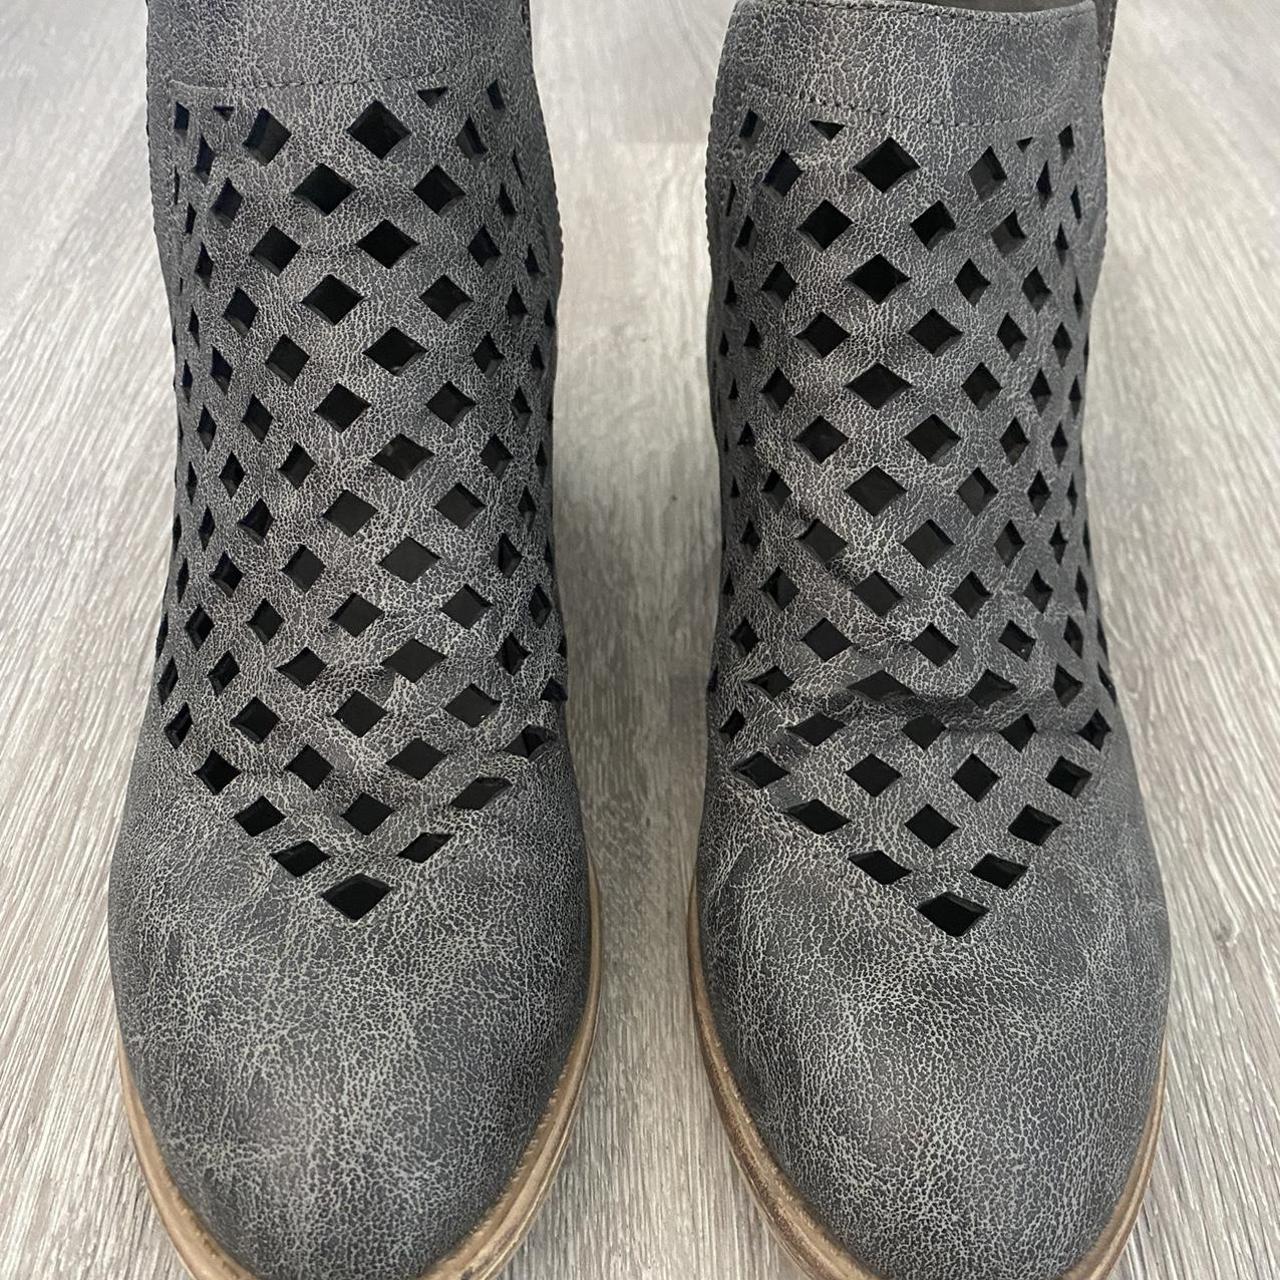 Chic Women's Grey Boots (4)